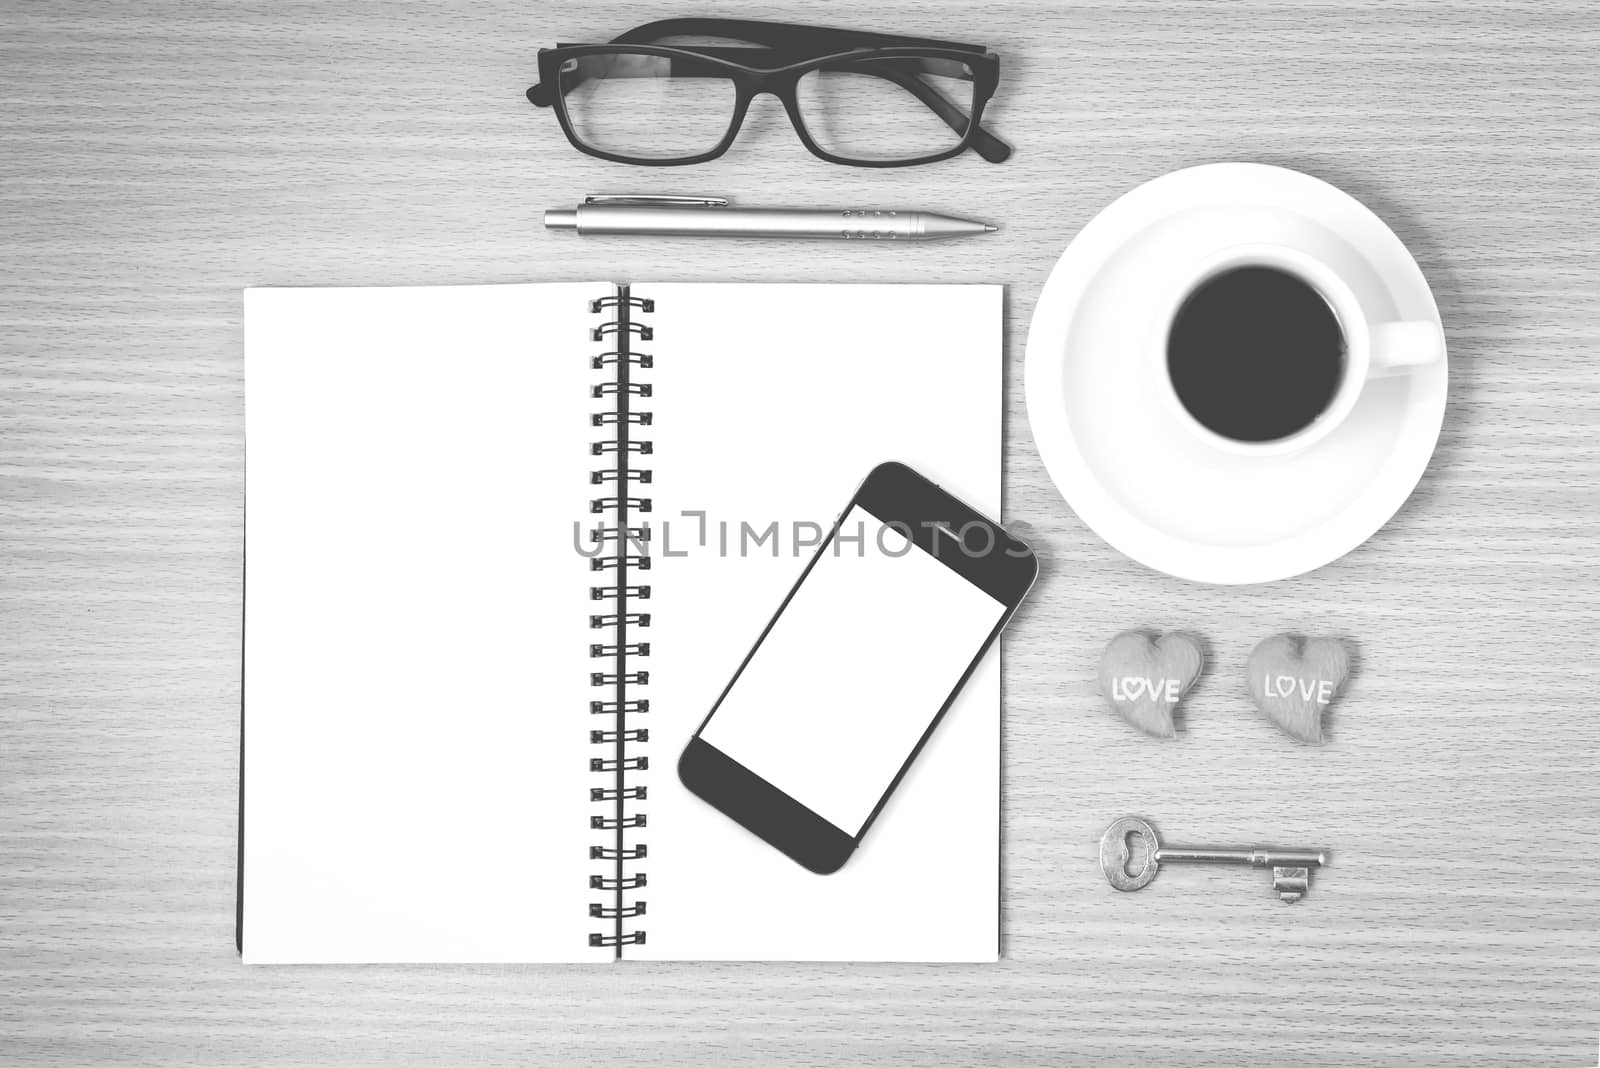 coffee and phone with key,eyeglasses,notepad,heart black and whi by ammza12